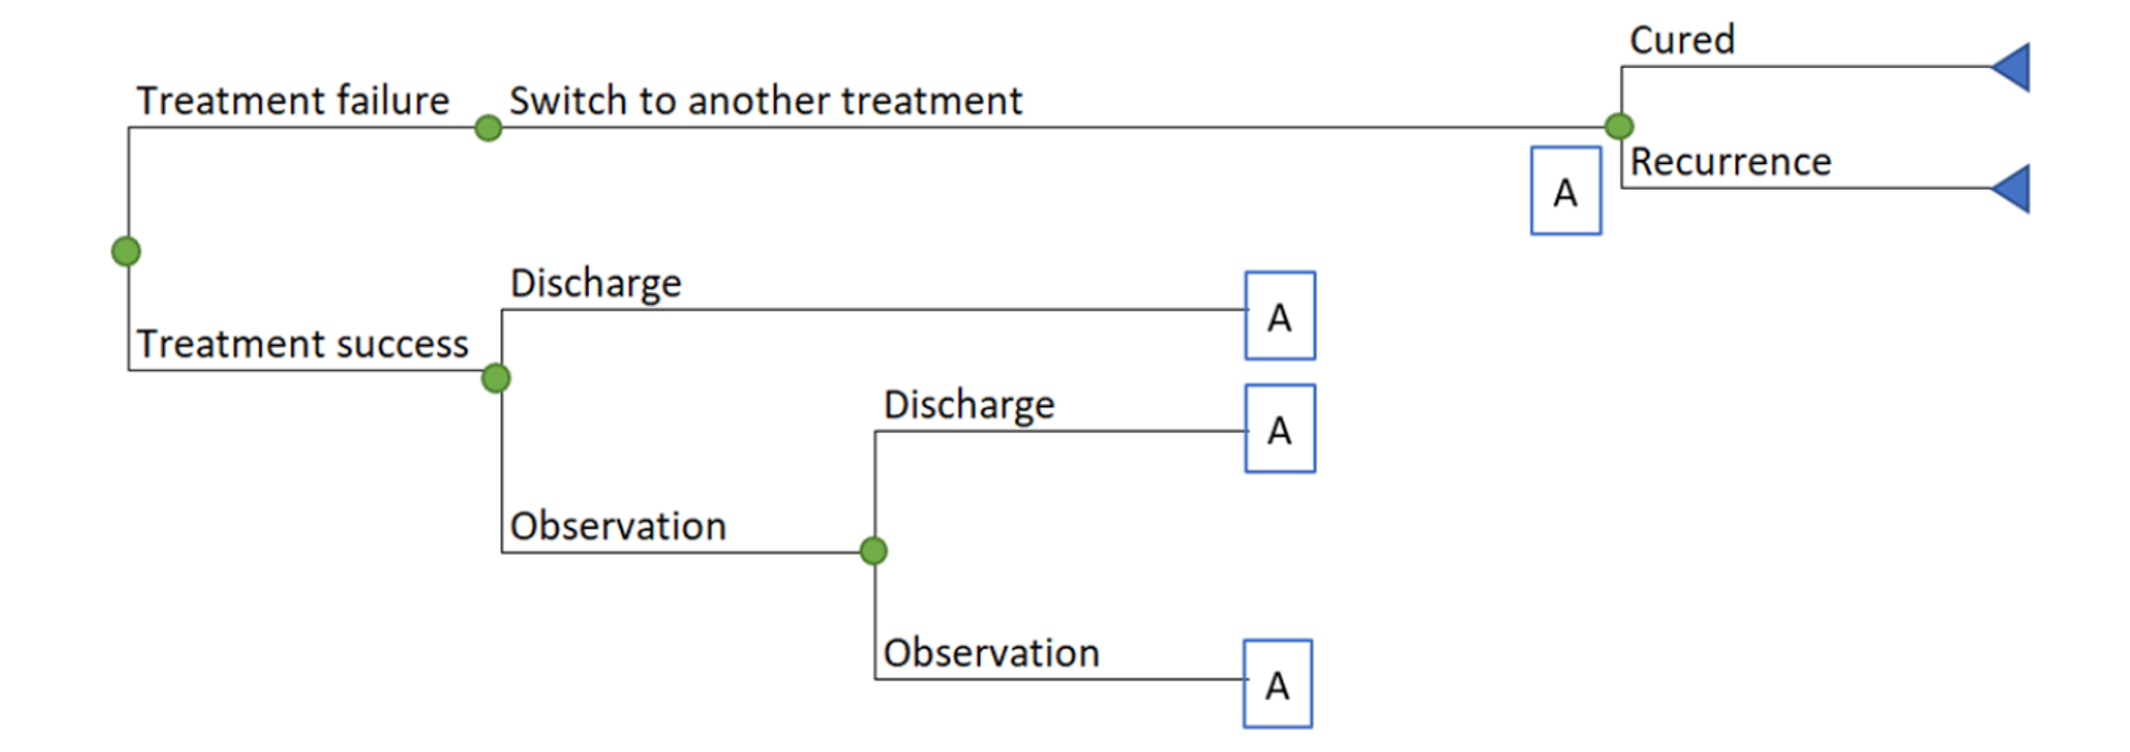 This is a model structure of the decision tree for patients with severe acute bacterial skin and skin structure infections. Patients enter the decision tree and are assessed for either treatment success or treatment failure. Patients who experience treatment failure switch to another treatment which will either provide a cure or lead to recurrence. Patients with treatment success are either discharged or observed. Observation also leads to either discharge or further observation. The nodes terminate in either patient cure or disease recurrence.